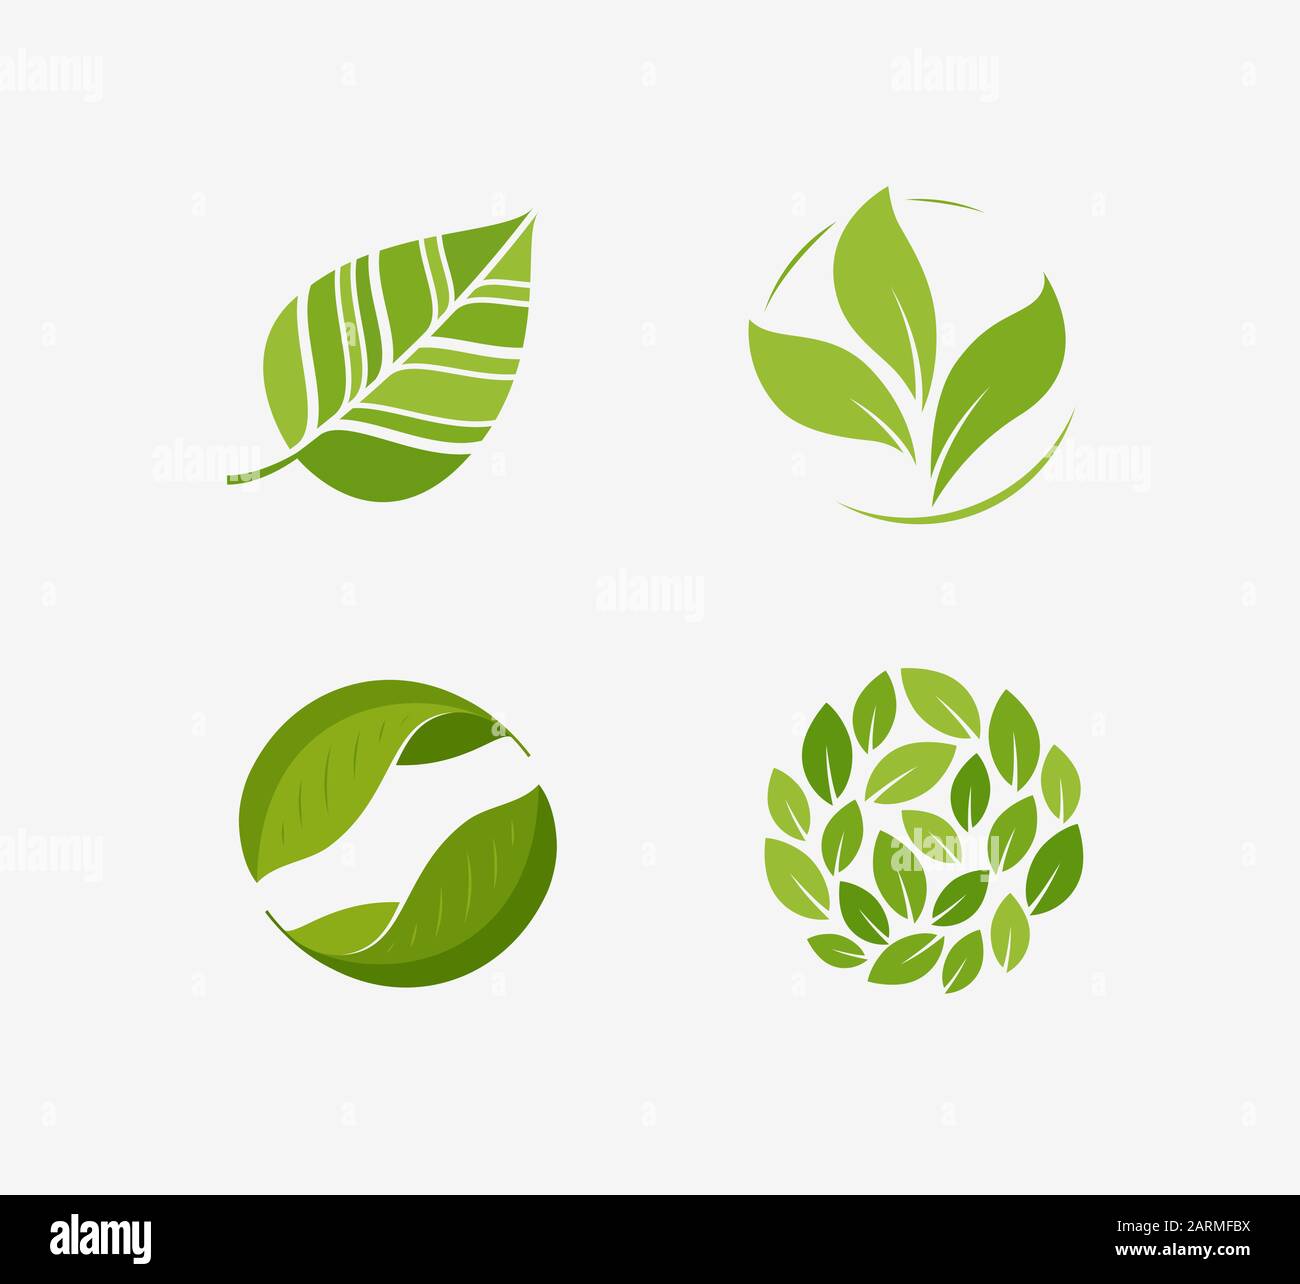 Green leaf logo. Leaves, nature, ecology symbol or icon vector Stock Vector